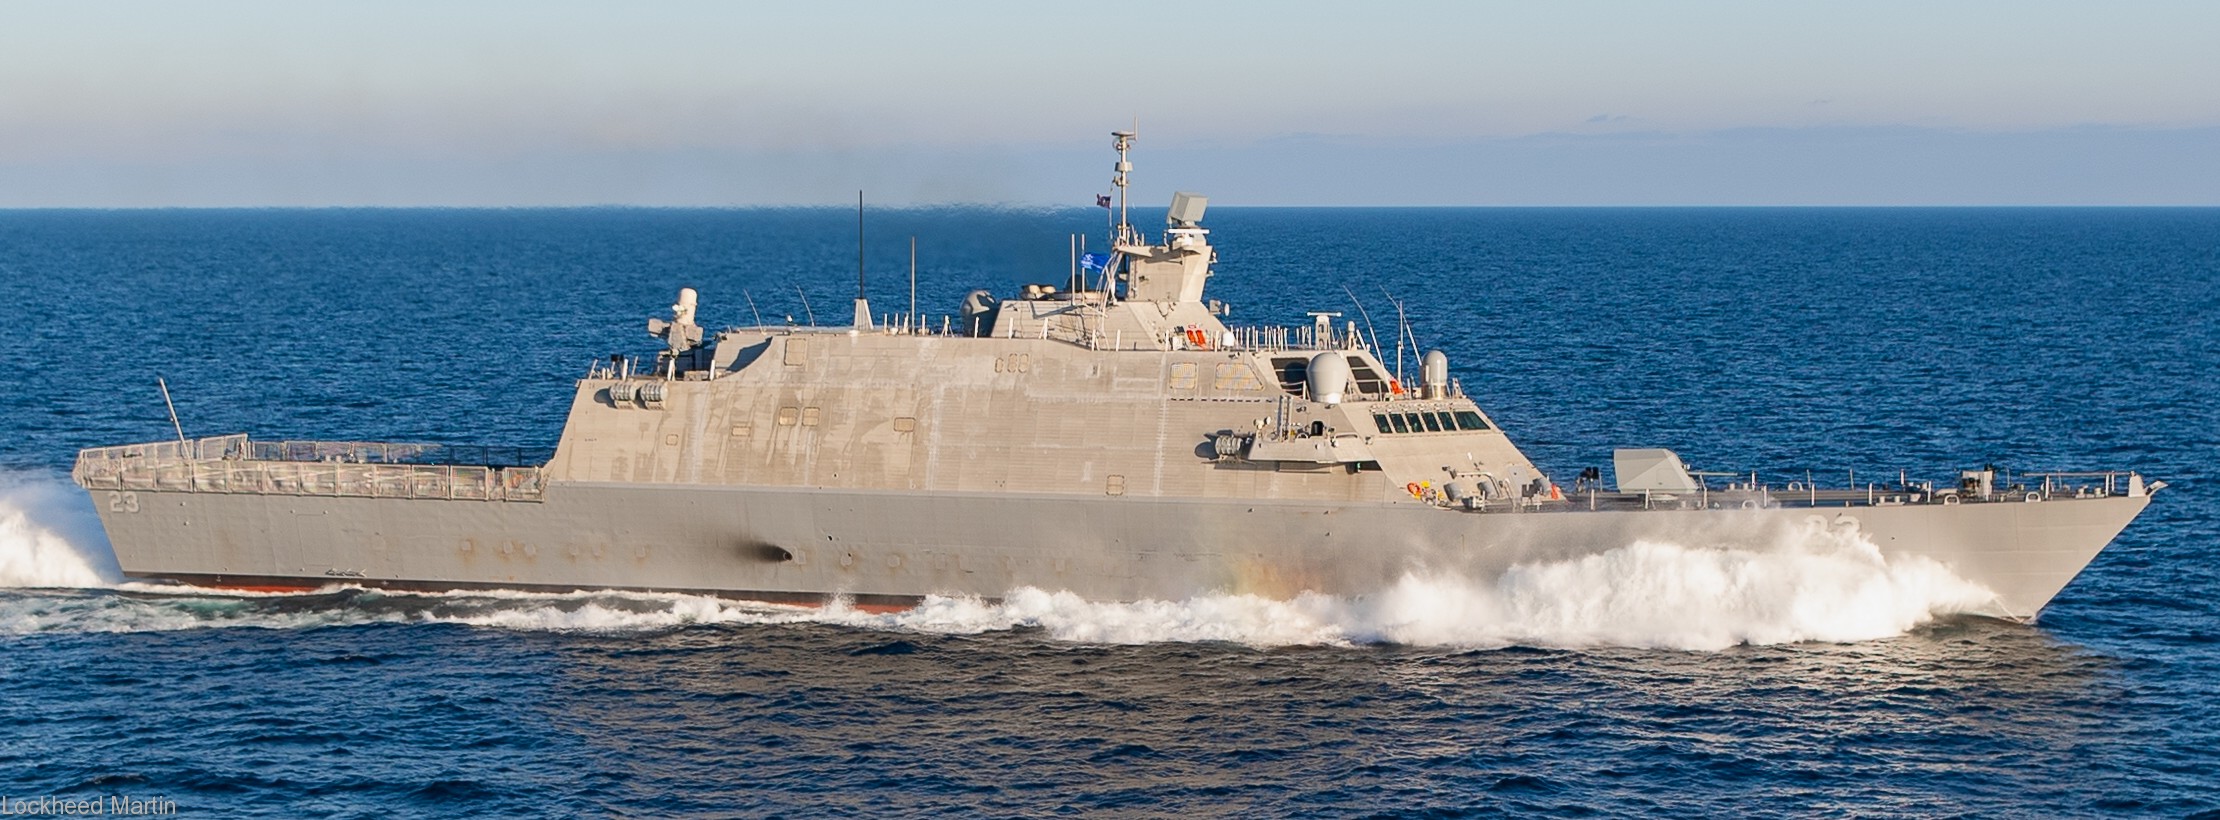 lcs-23 uss cooperstown freedom class littoral combat ship us navy 17